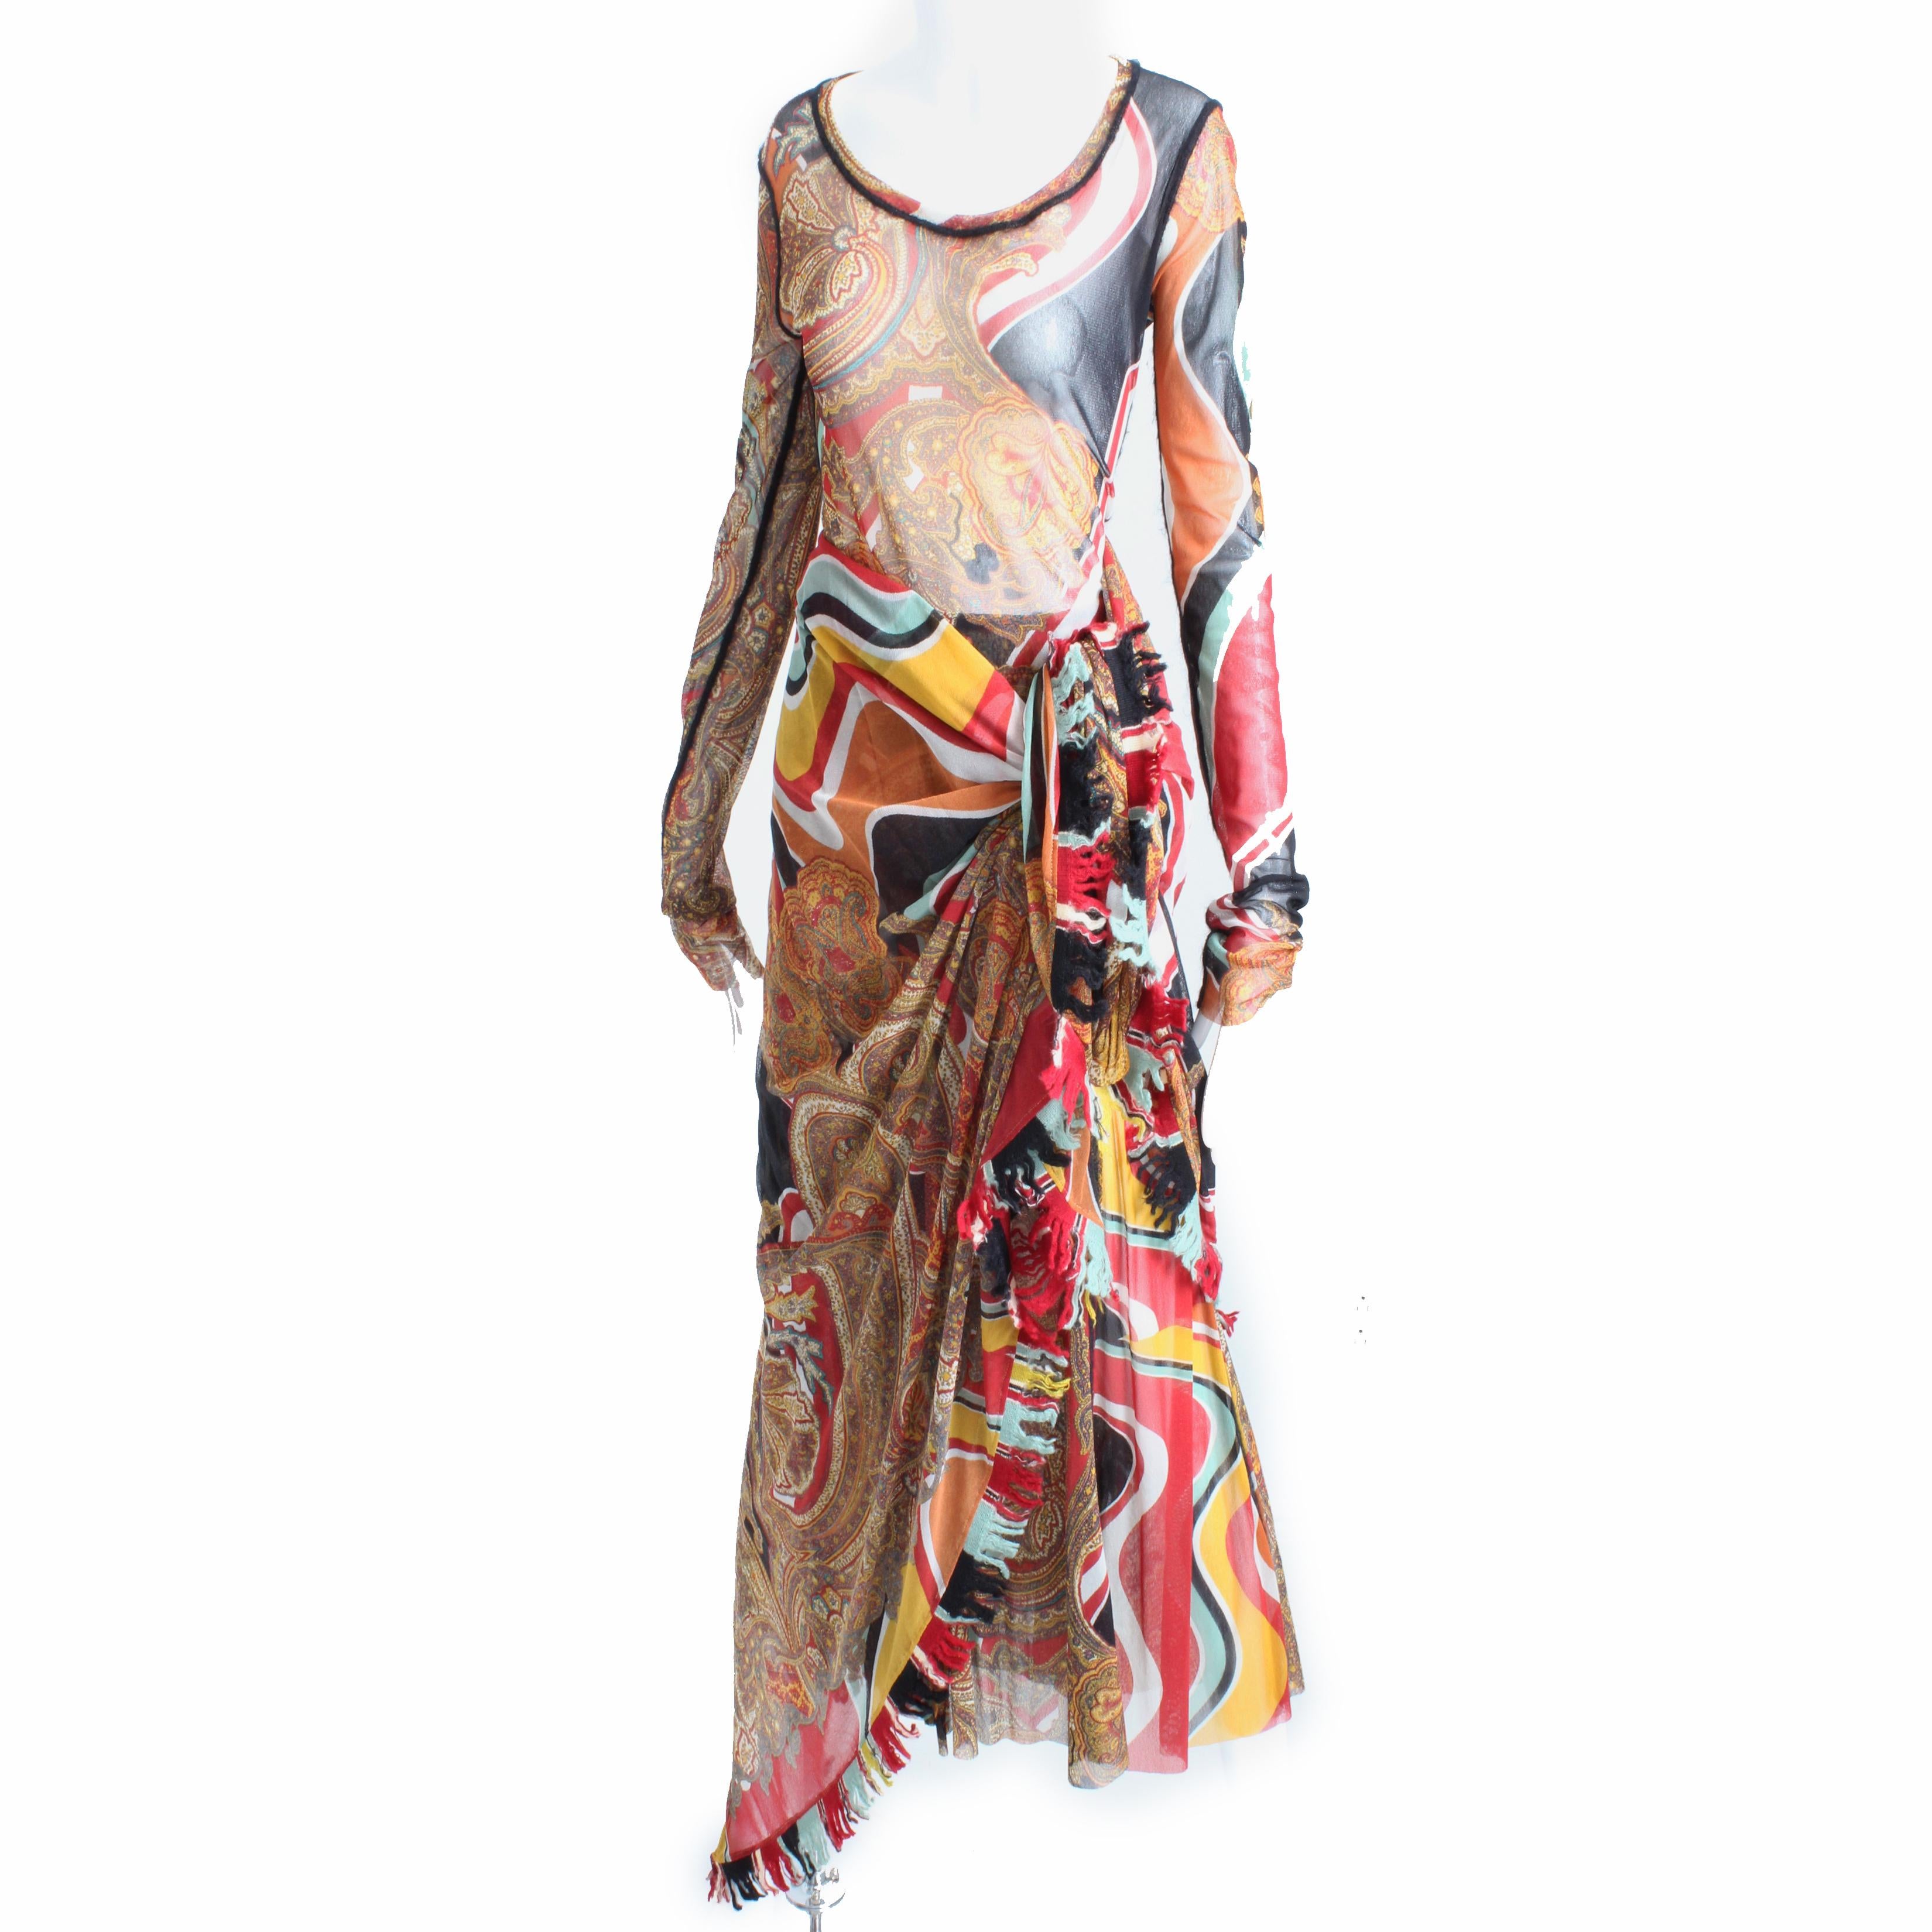 Rare Jean Paul Gaultier 3pc ensemble: sheer mesh top, skirt and 62in fringed scarf, likely made in the 90s. Made from a sheer synthetic net fabric (no content label, we believe it's polyamide and/or viscose), it features a gorgeous paisley &